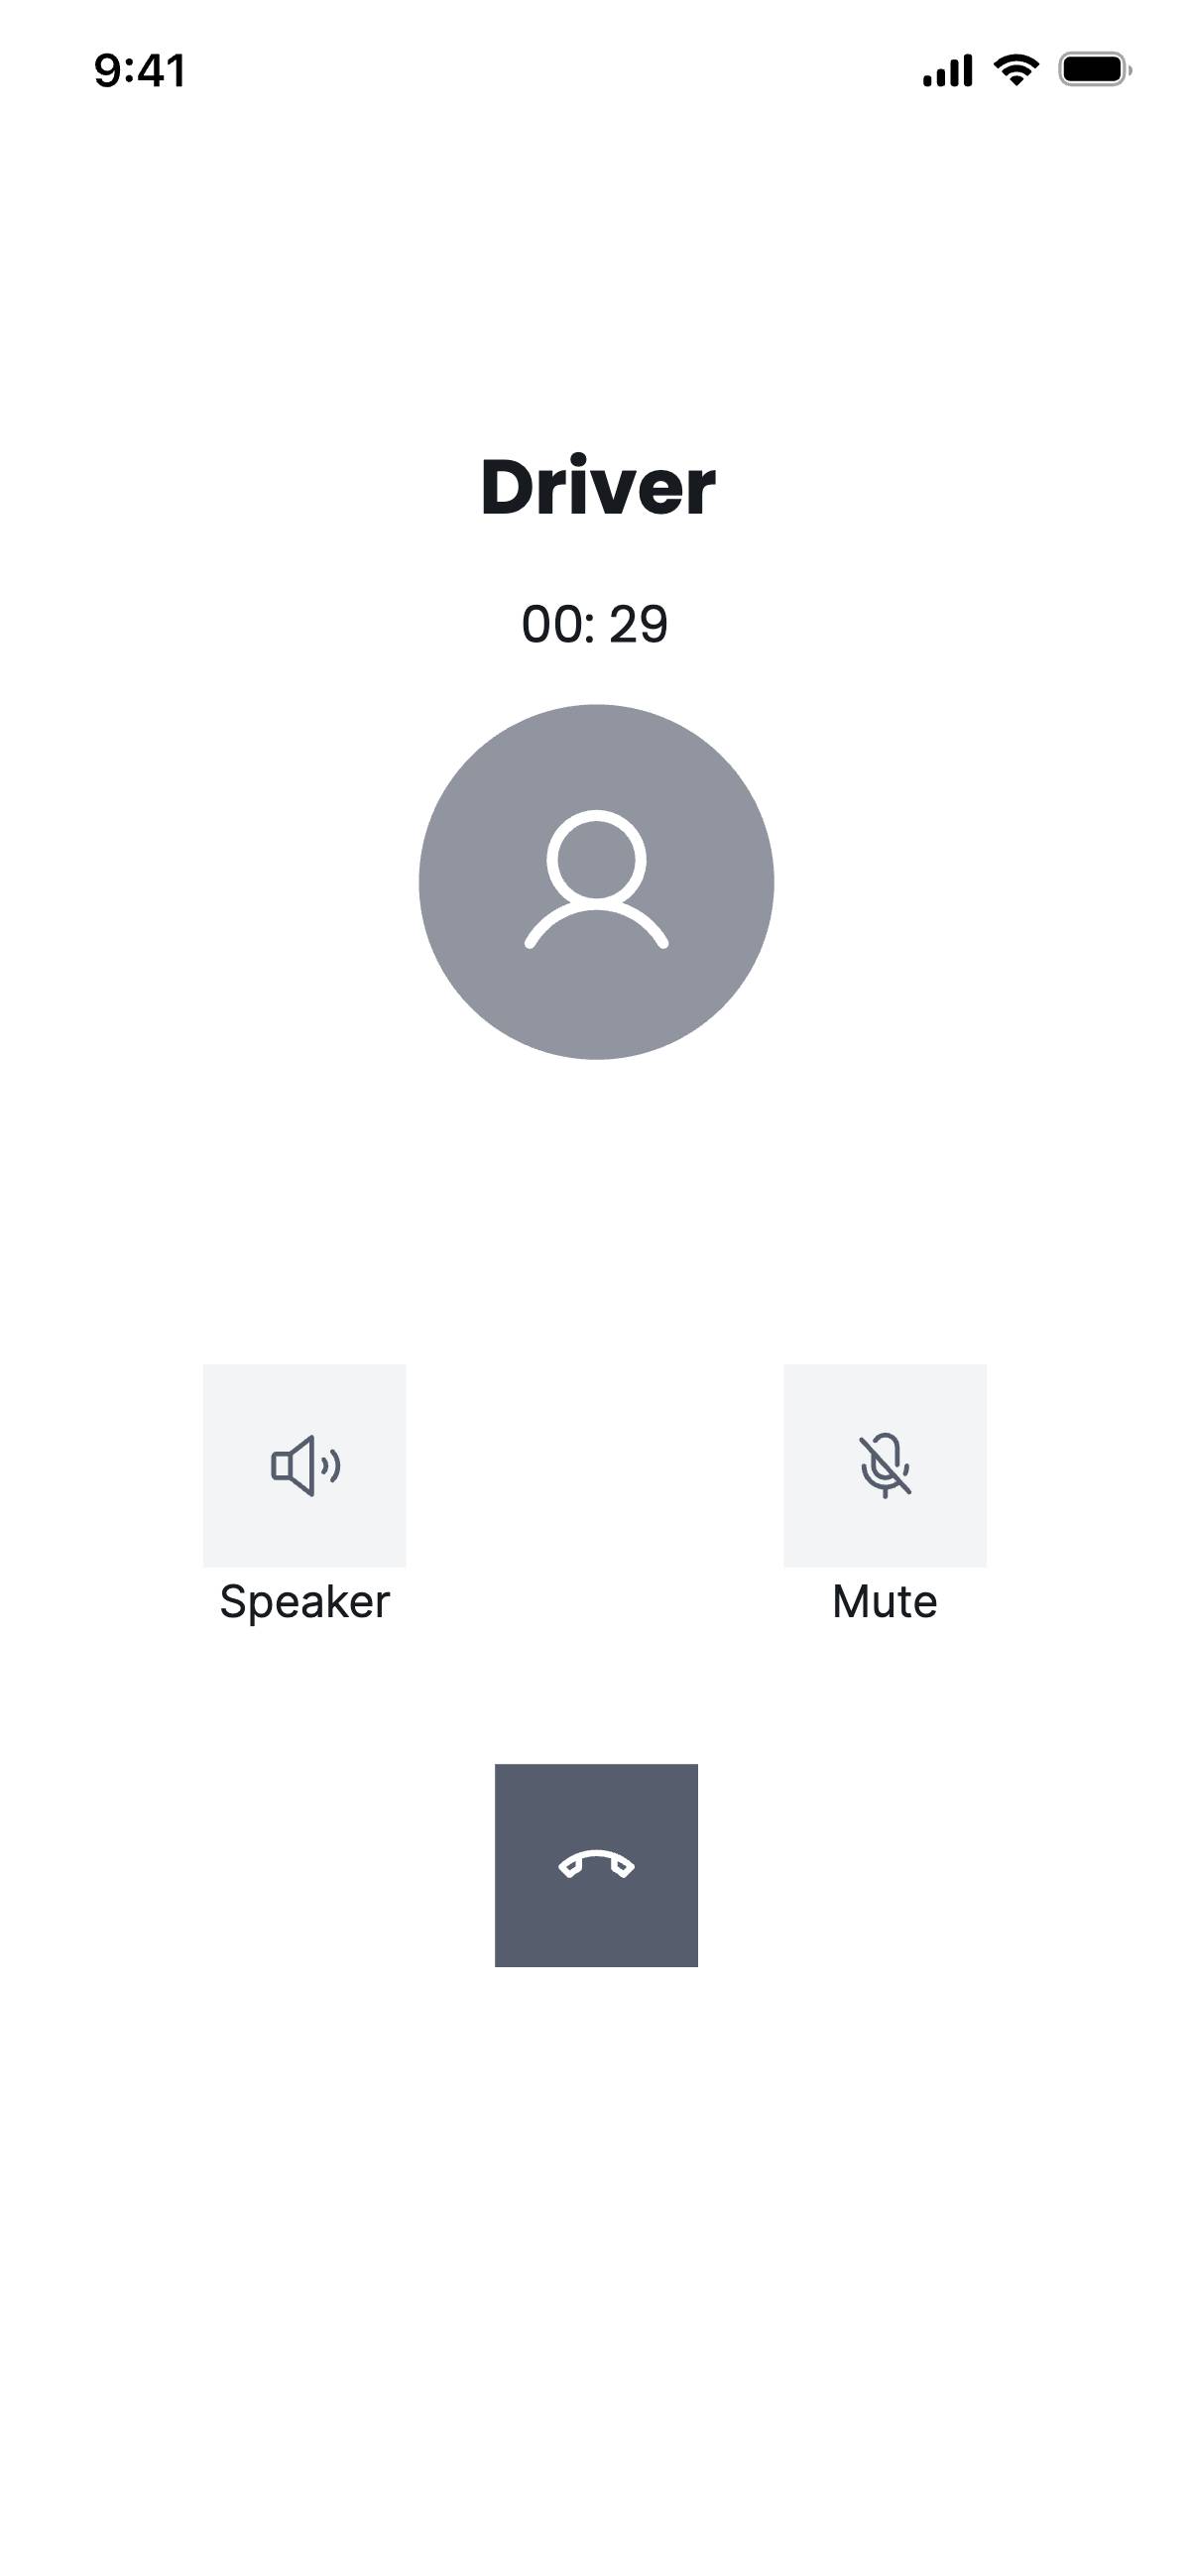 Audio call with  driver